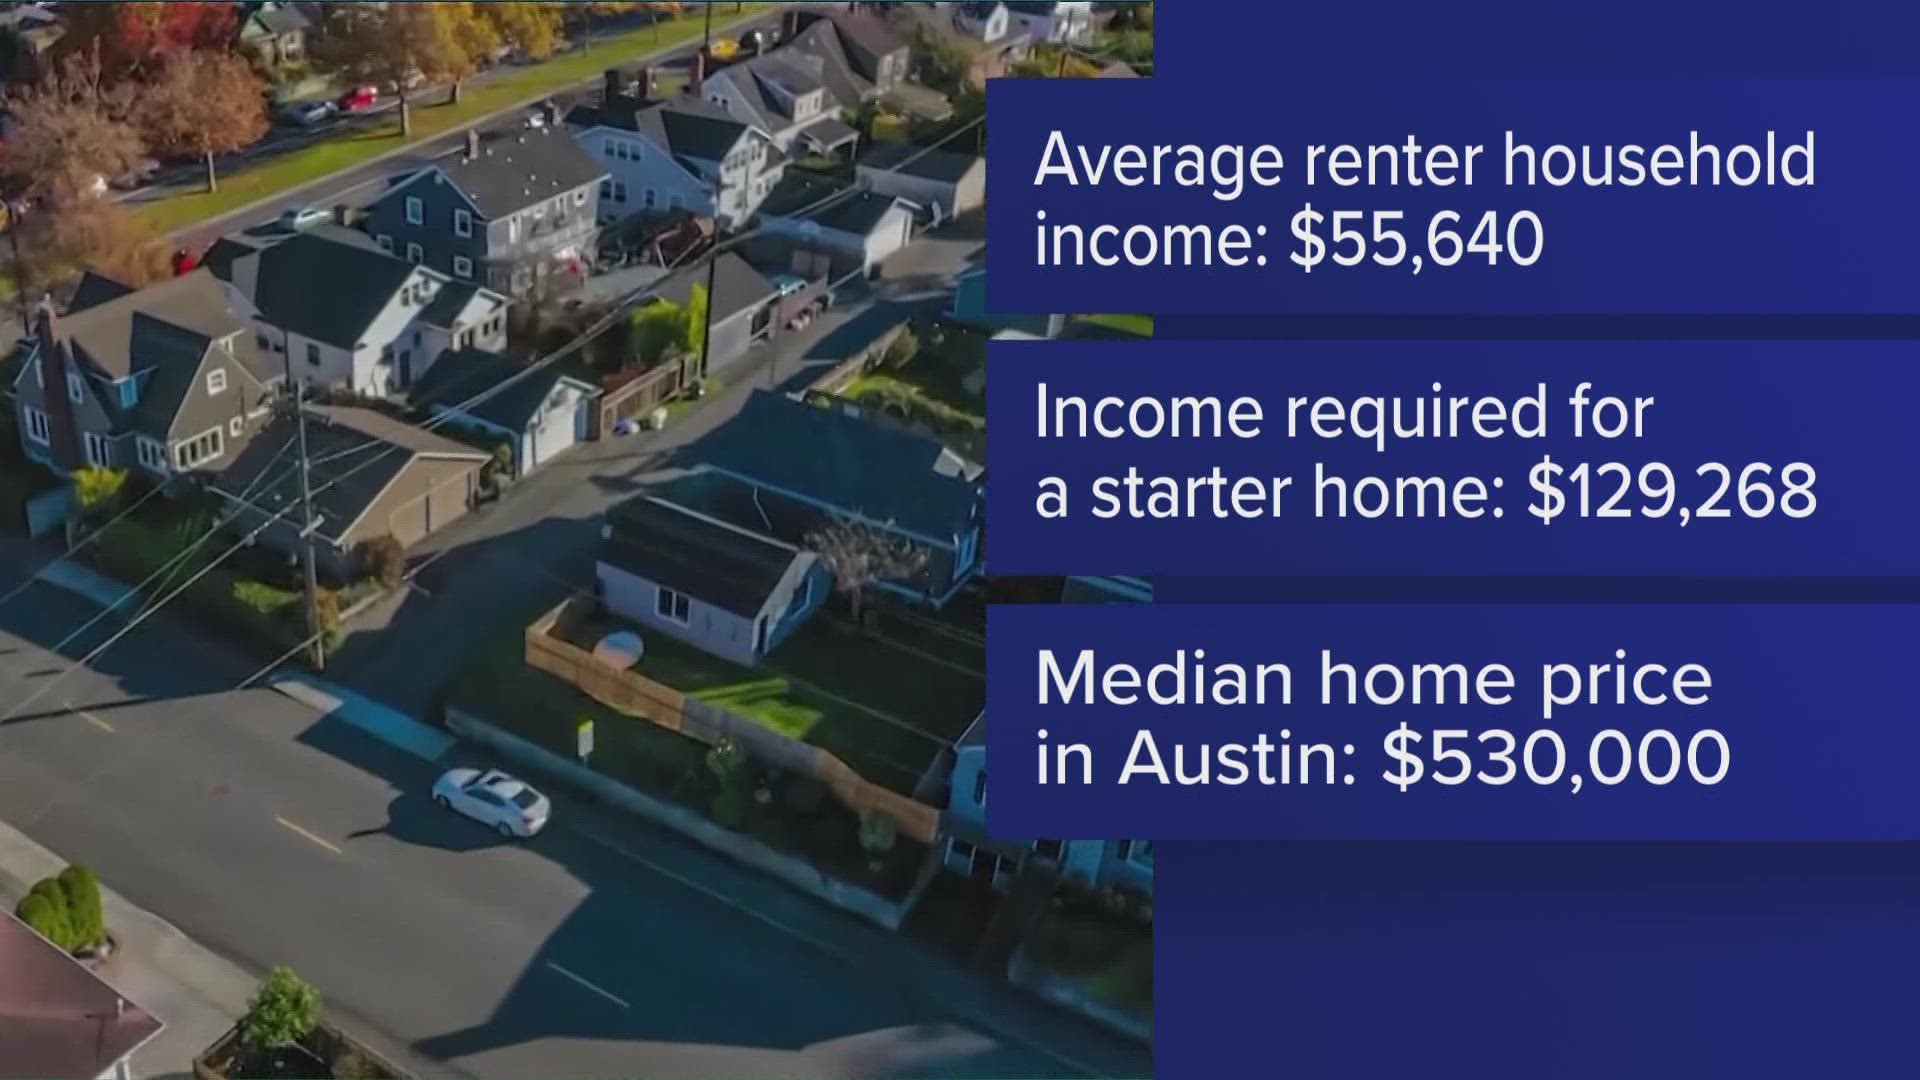 The rising cost of living in our area is making it harder for renters to be able to buy a starter home.